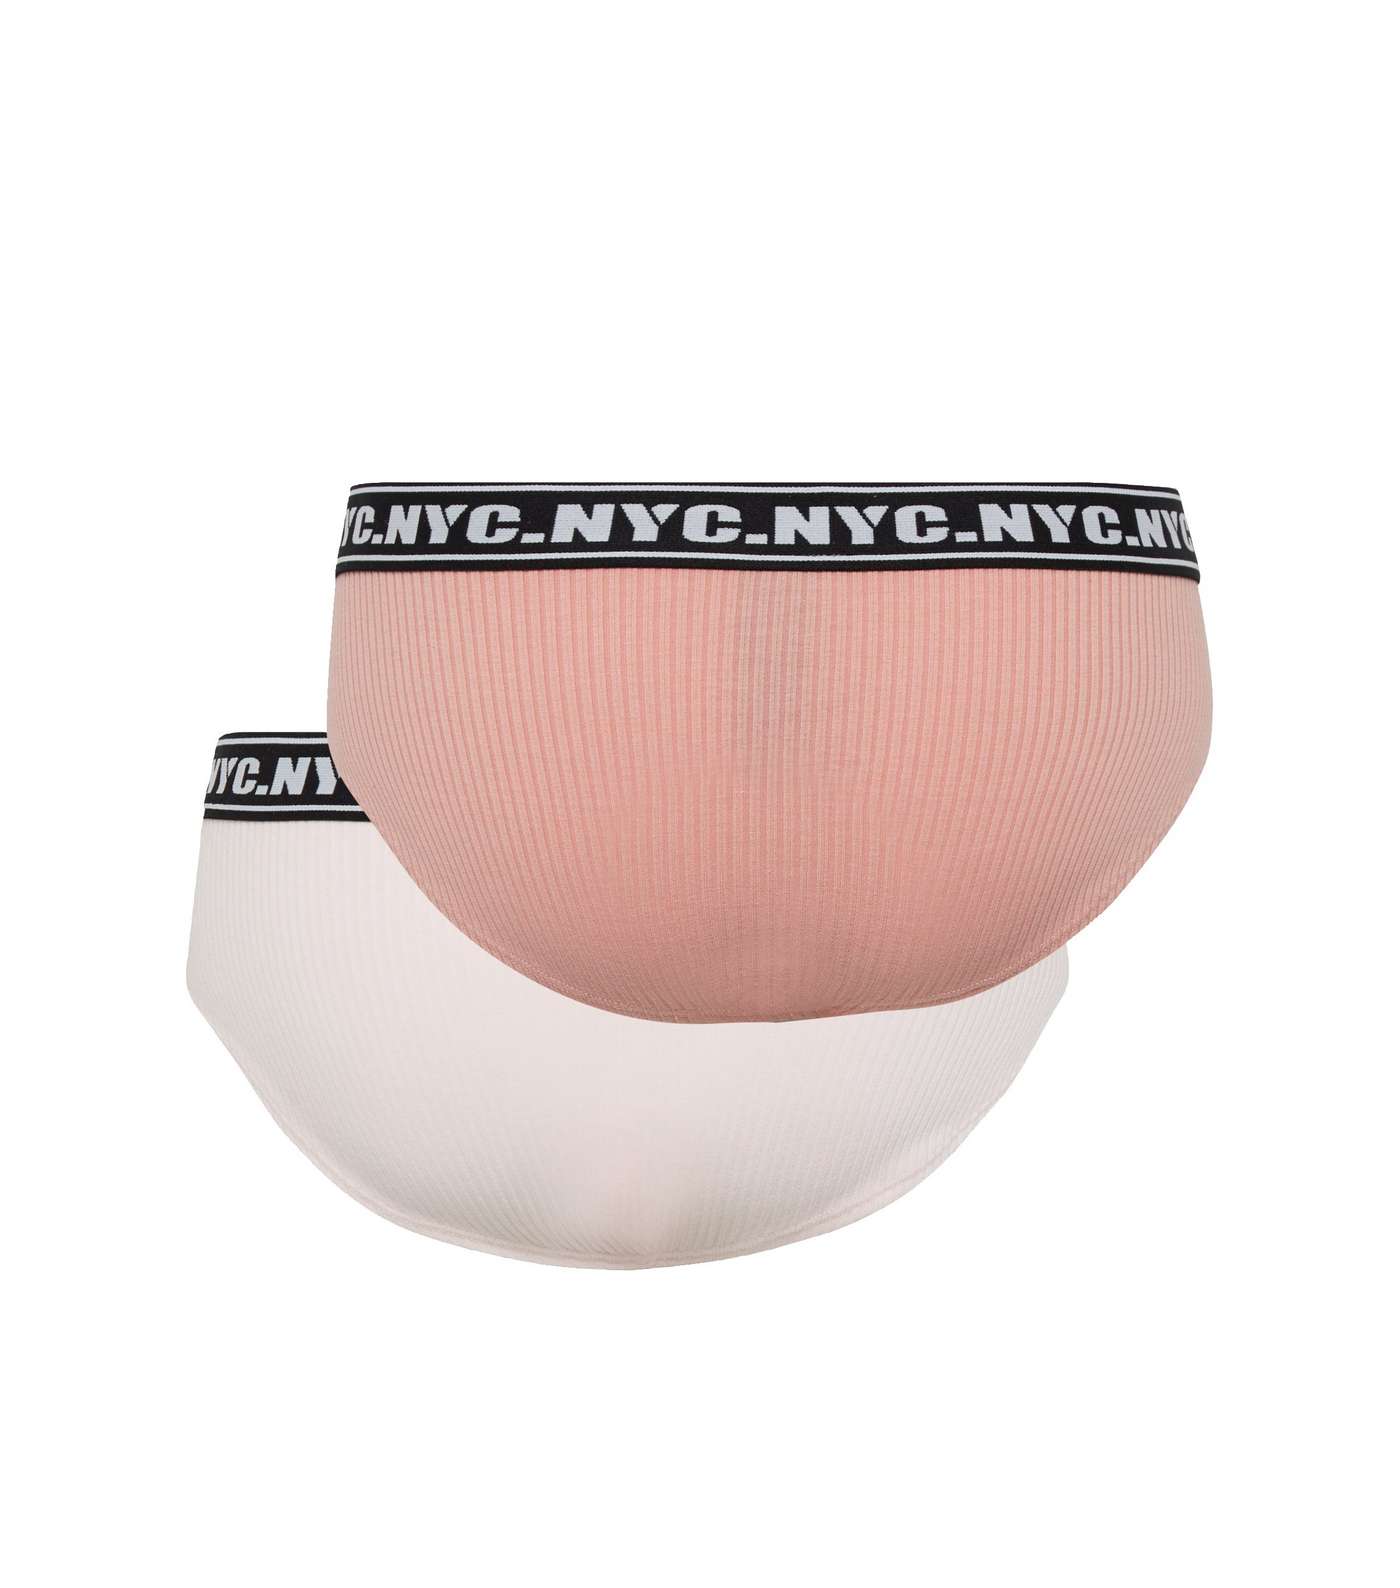 Girls 2 Pack Pink and Cream NYC Short Briefs Image 2